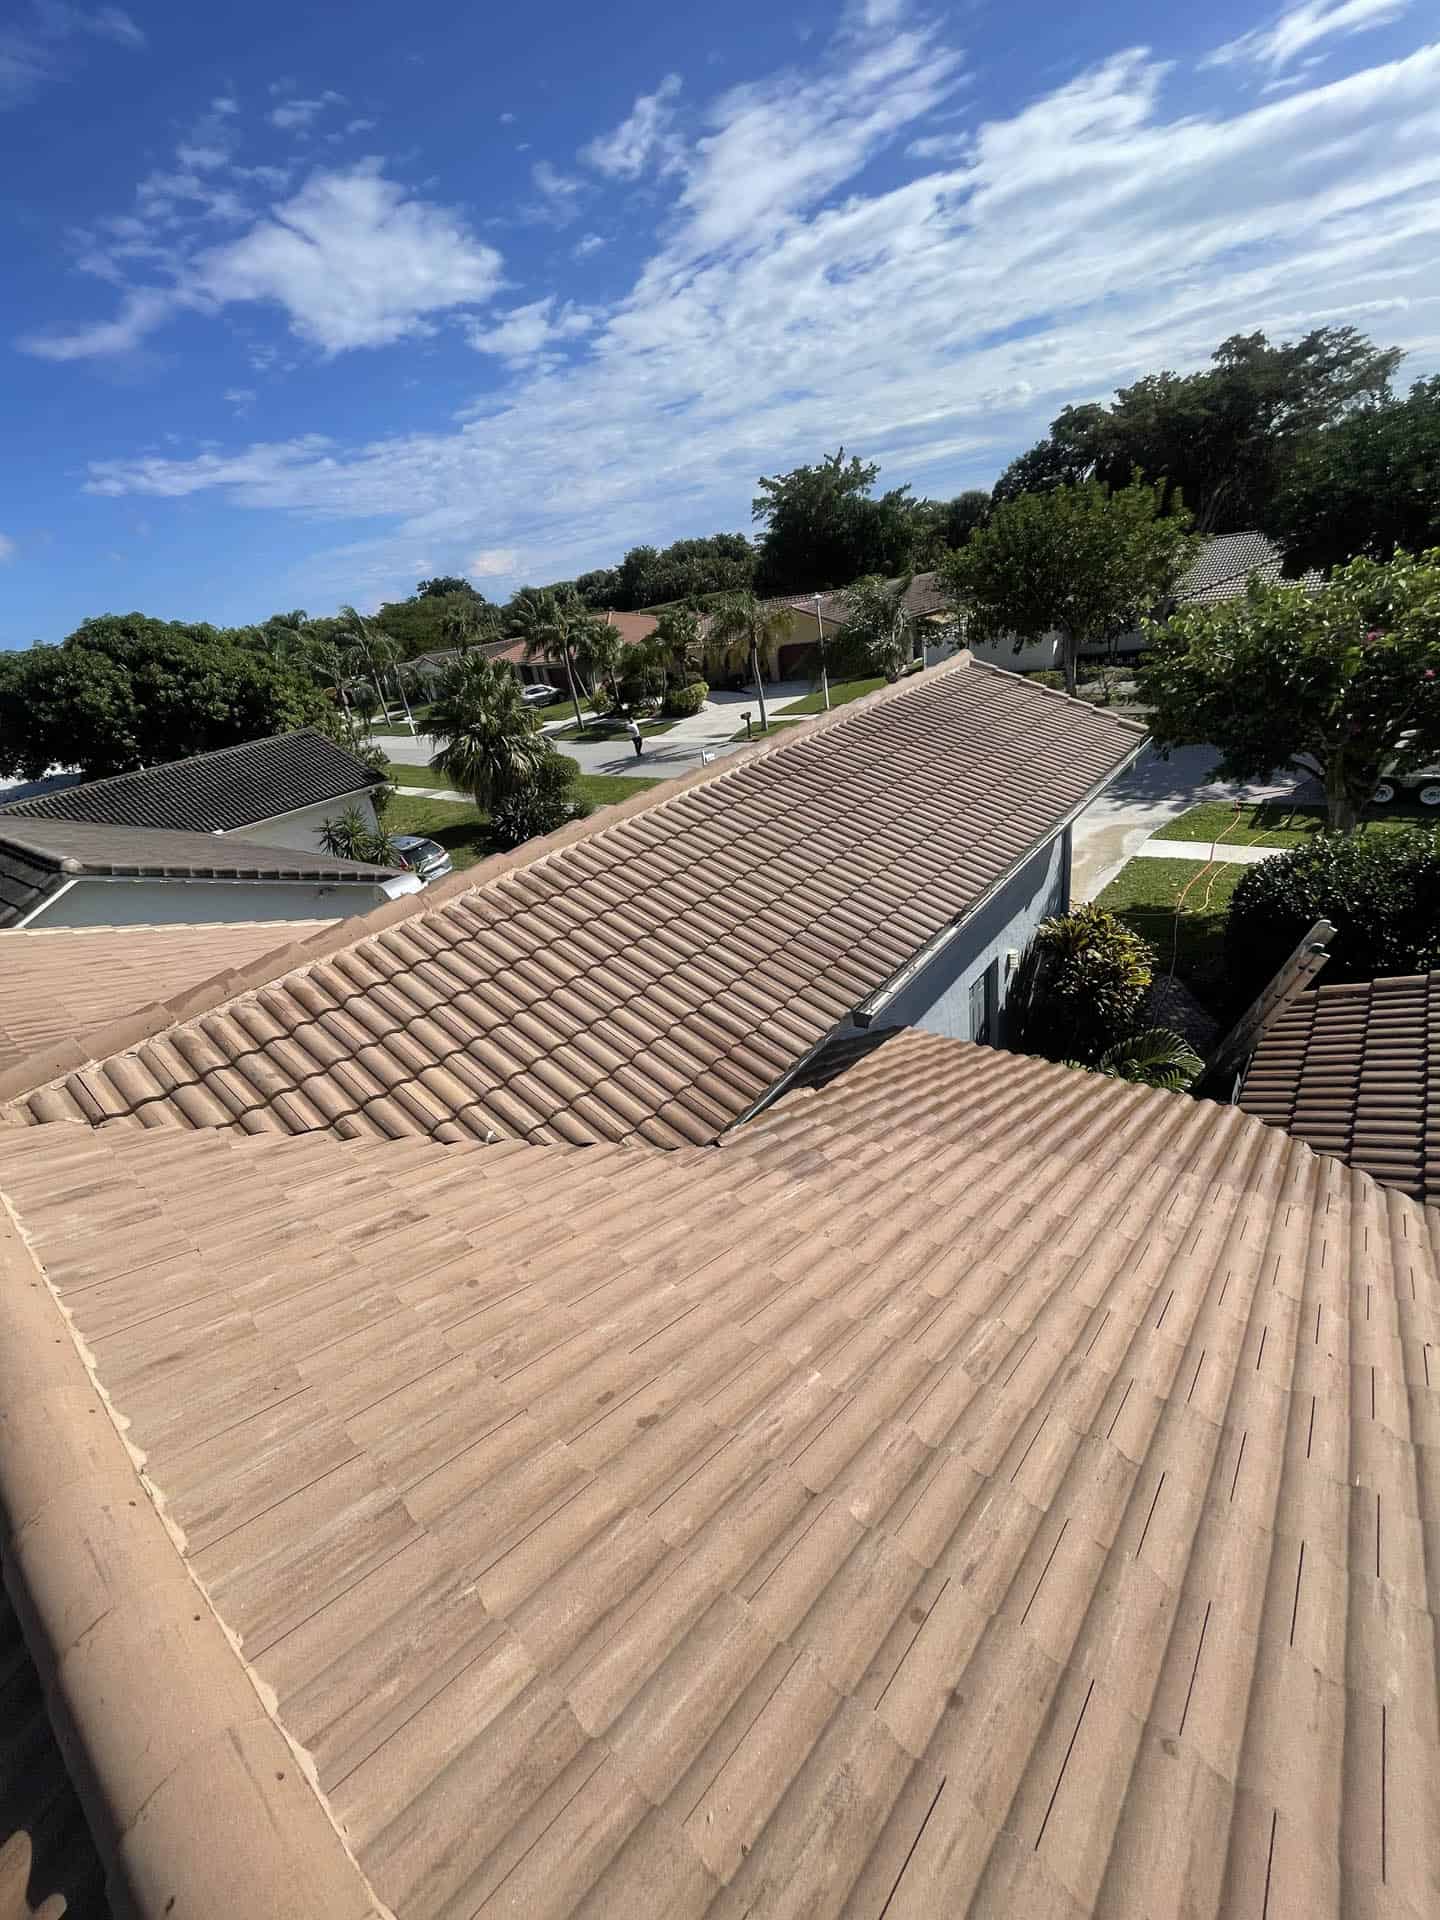 The Best Way to Soft Wash a Residential Roof